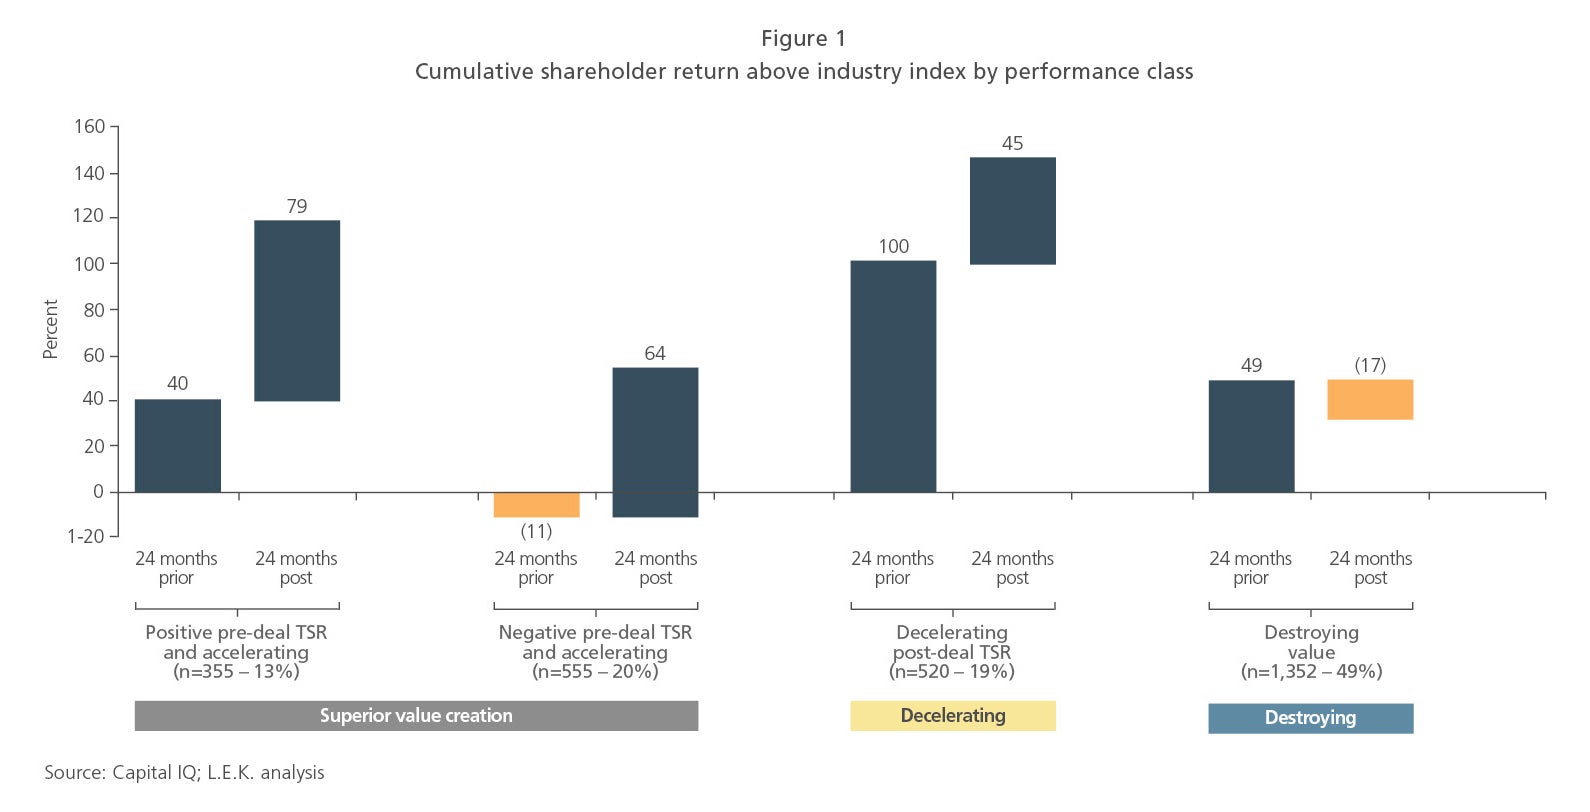 Cumulative shareholder return above industry index by performance class